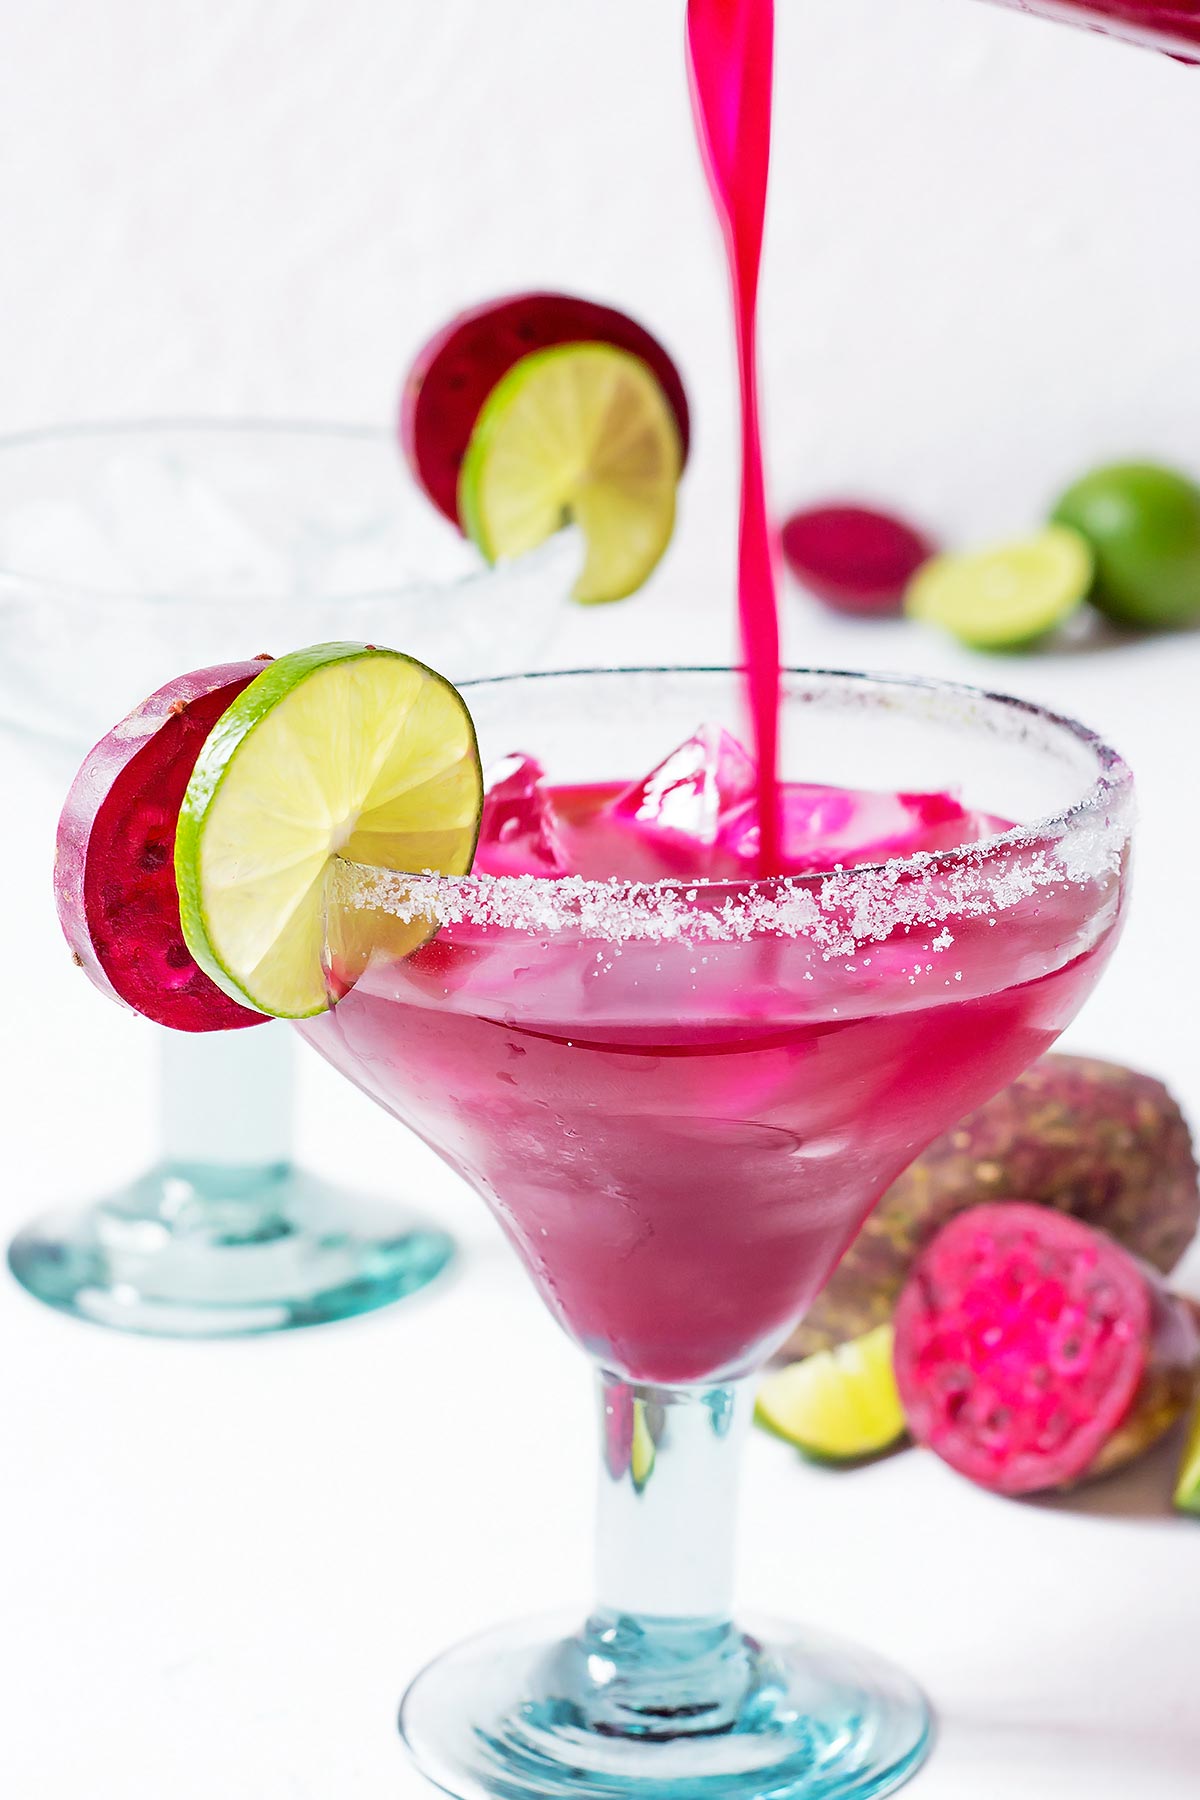 Pouring Prickly Pear Margarita into glass